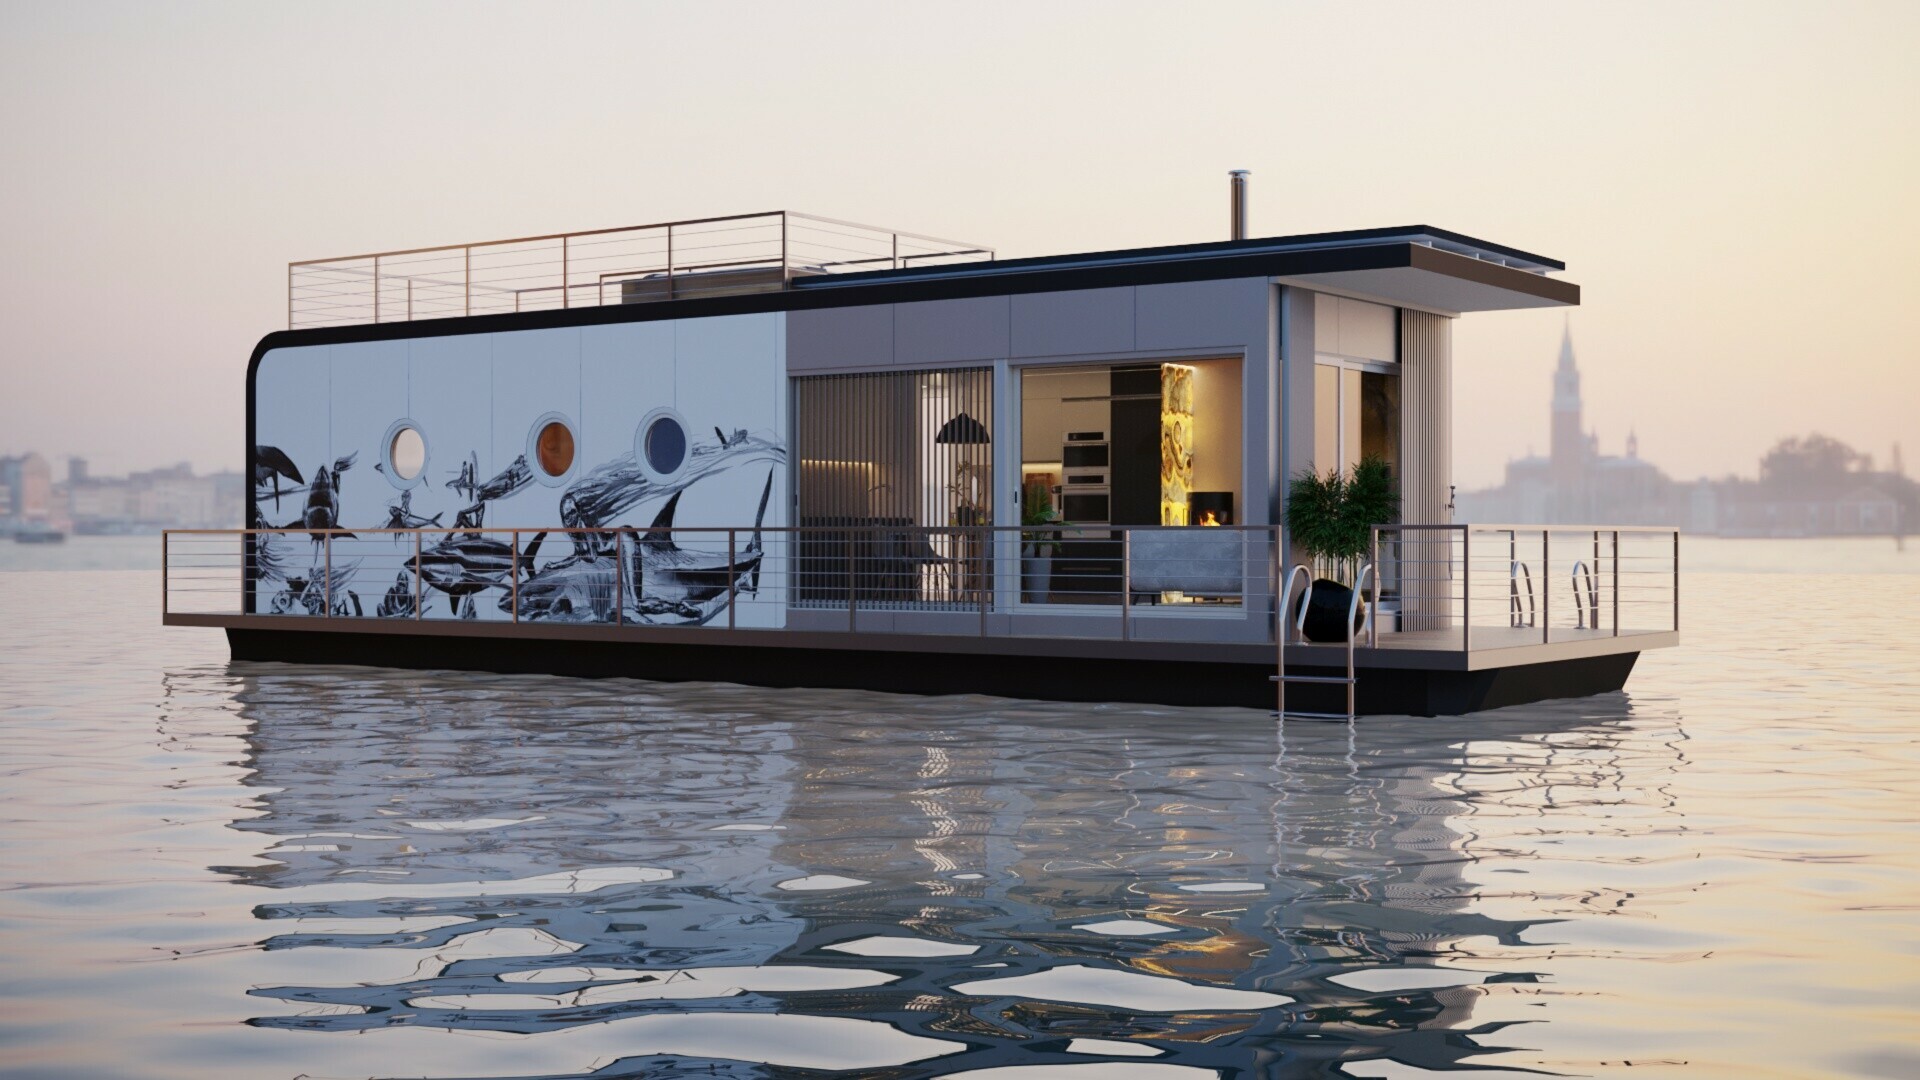 About Housesboat